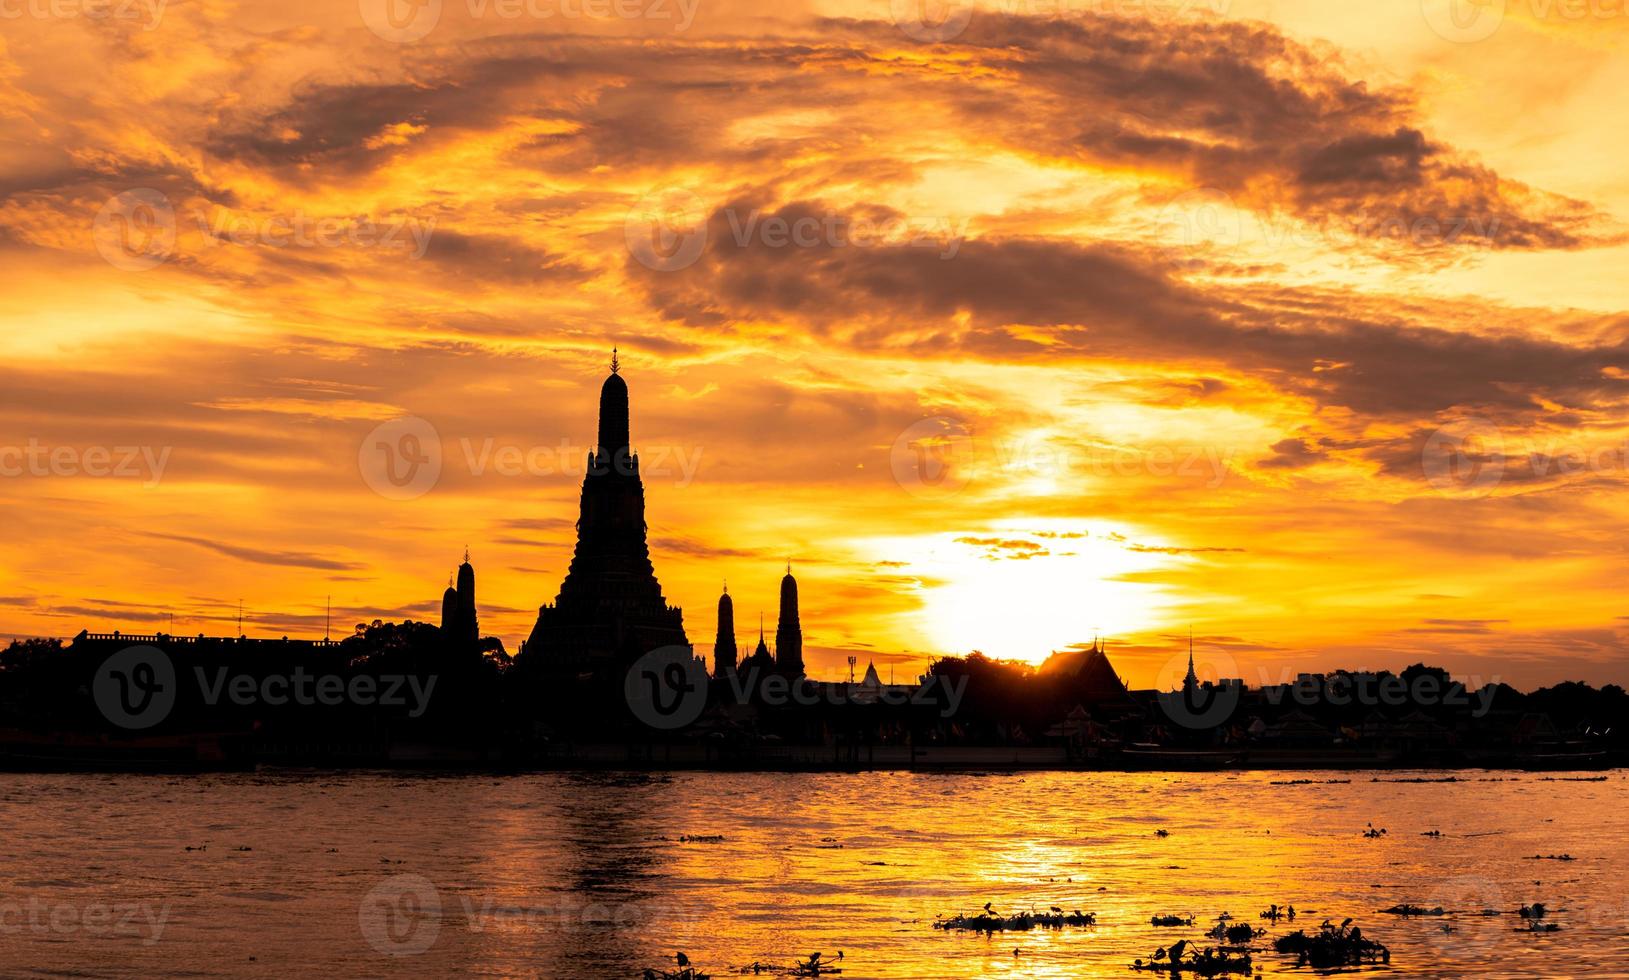 River and Wat Arun Ratchawararam at sunset with beautiful  orange sky and clouds. Wat Arun buddhist temple is the landmark in Bangkok, Thailand. Silhouette dramatic sky and temple in Thailand. photo